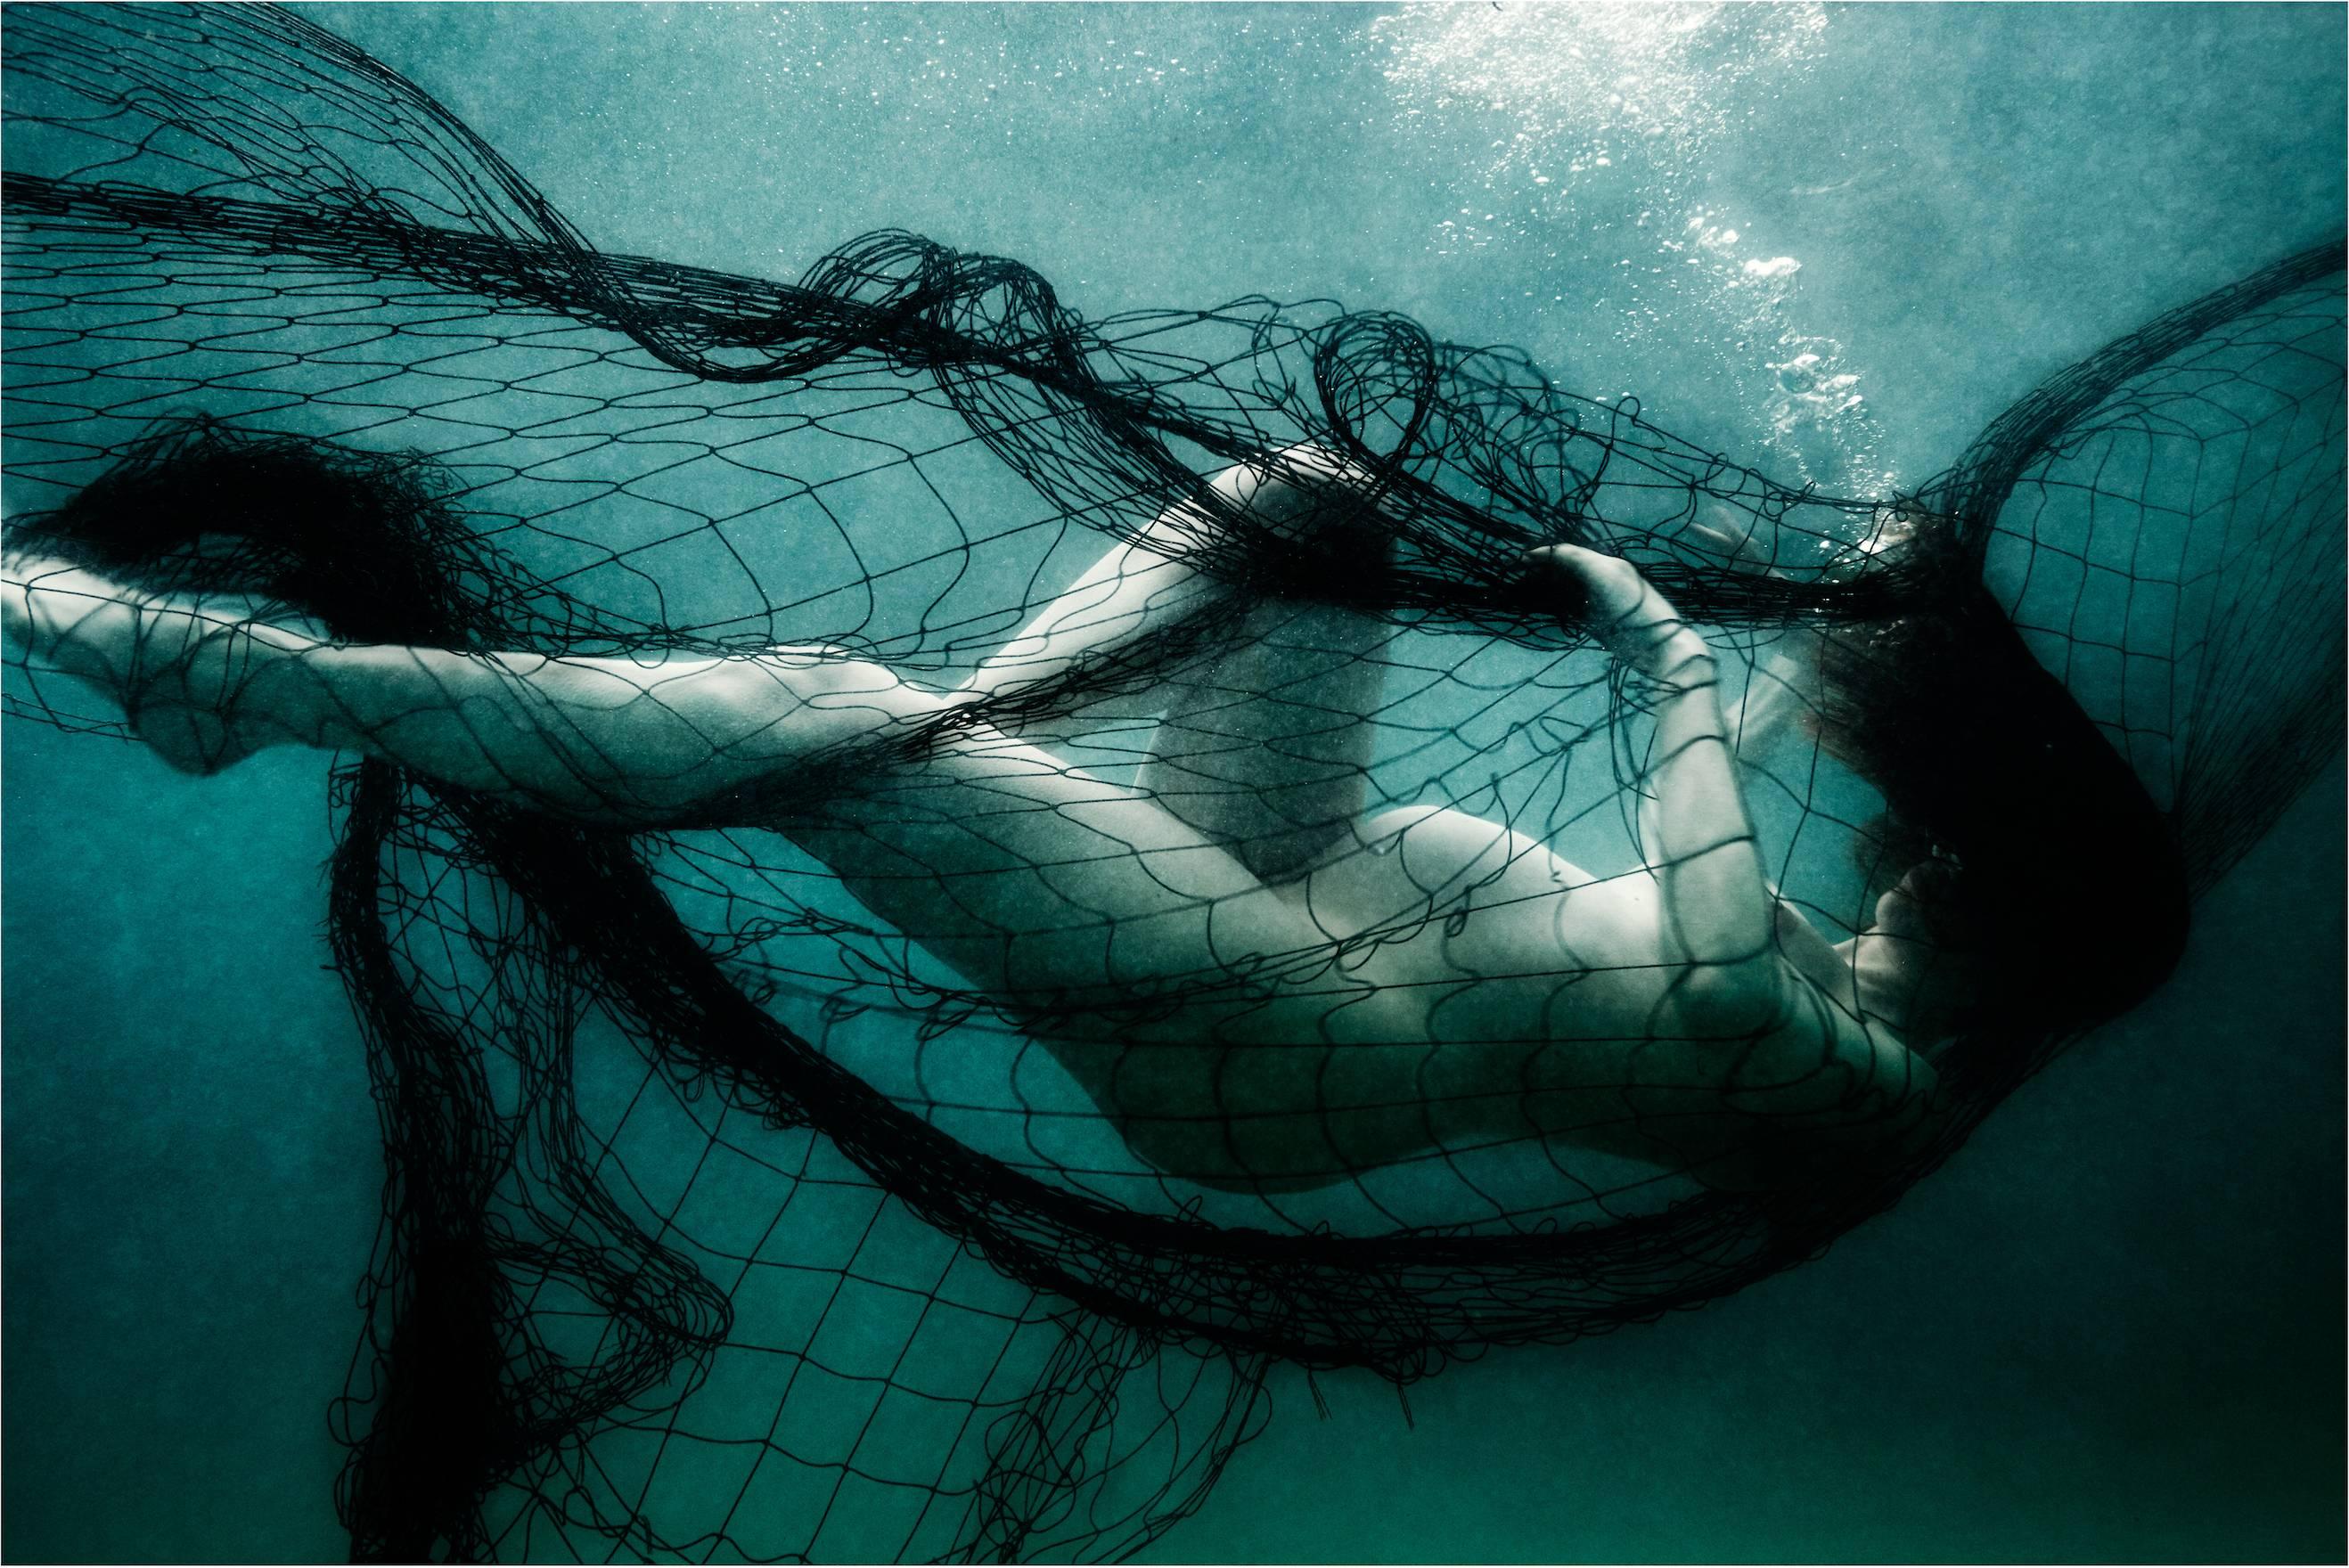 Claudia Legge Black and White Photograph - The Return of the Native 4 - underwater nude, pregnant woman